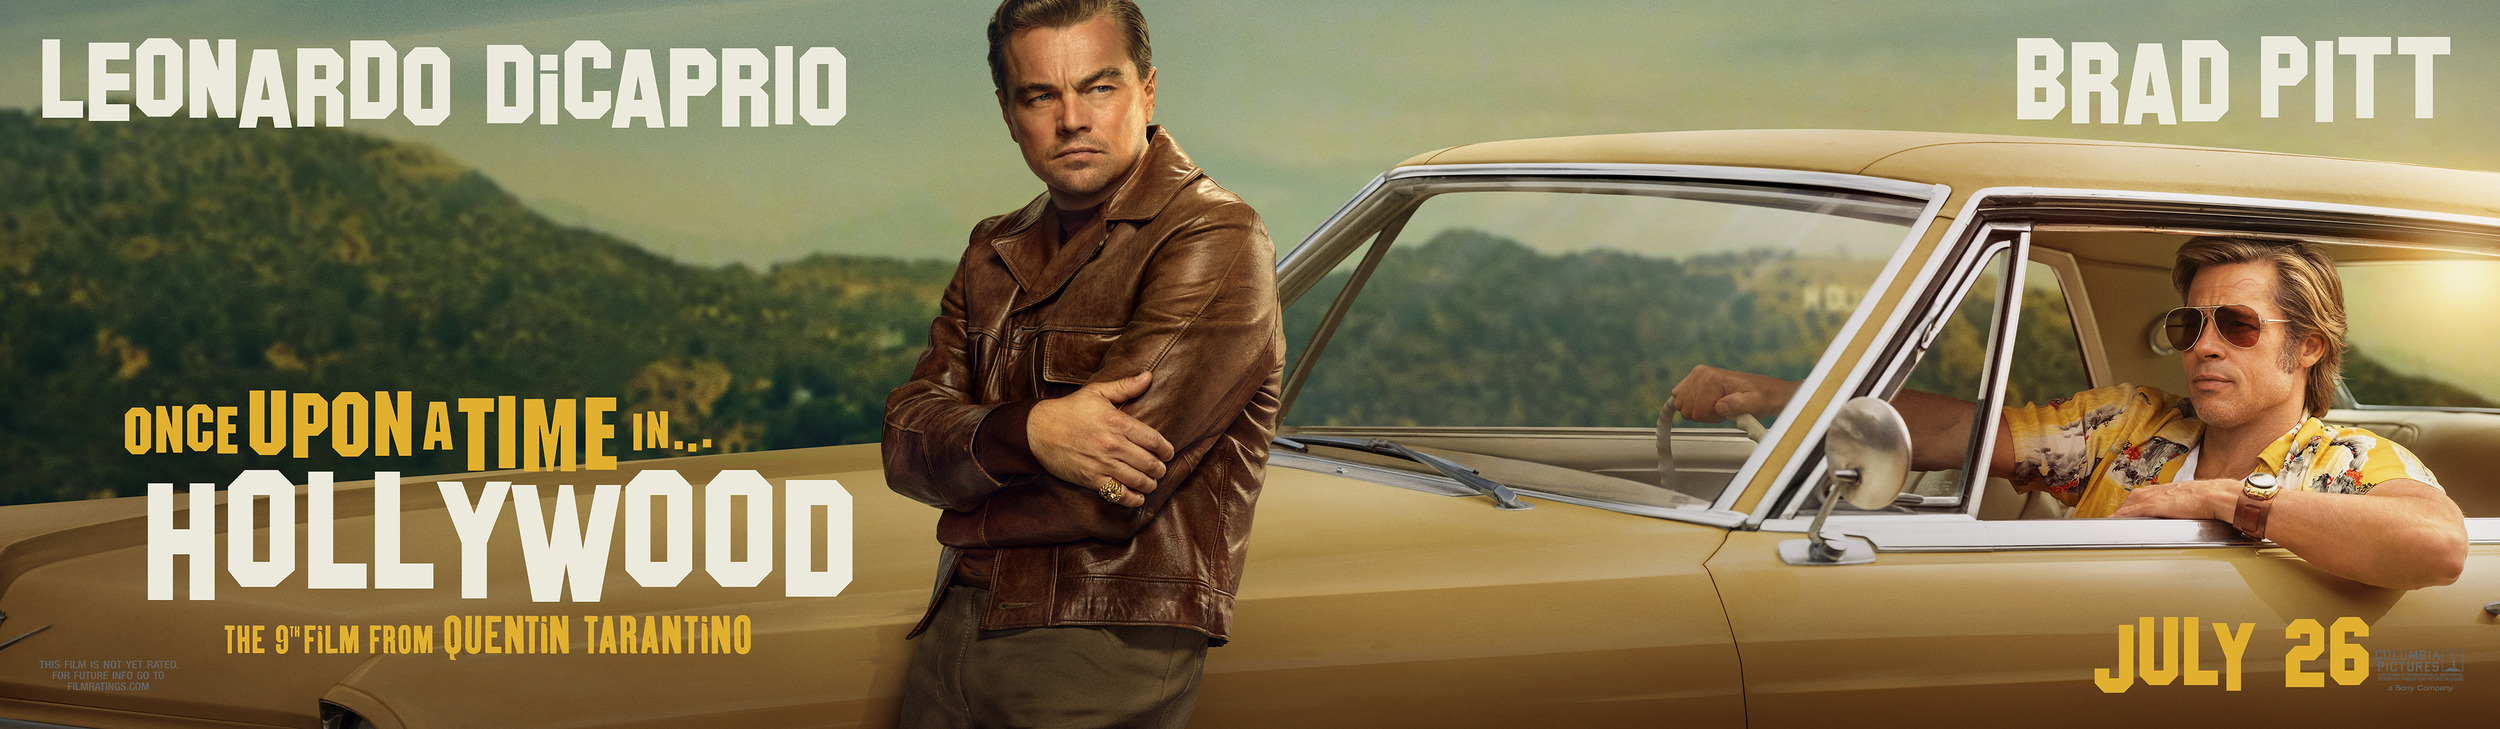 Mega Sized Movie Poster Image for Once Upon a Time in Hollywood (#10 of 31)